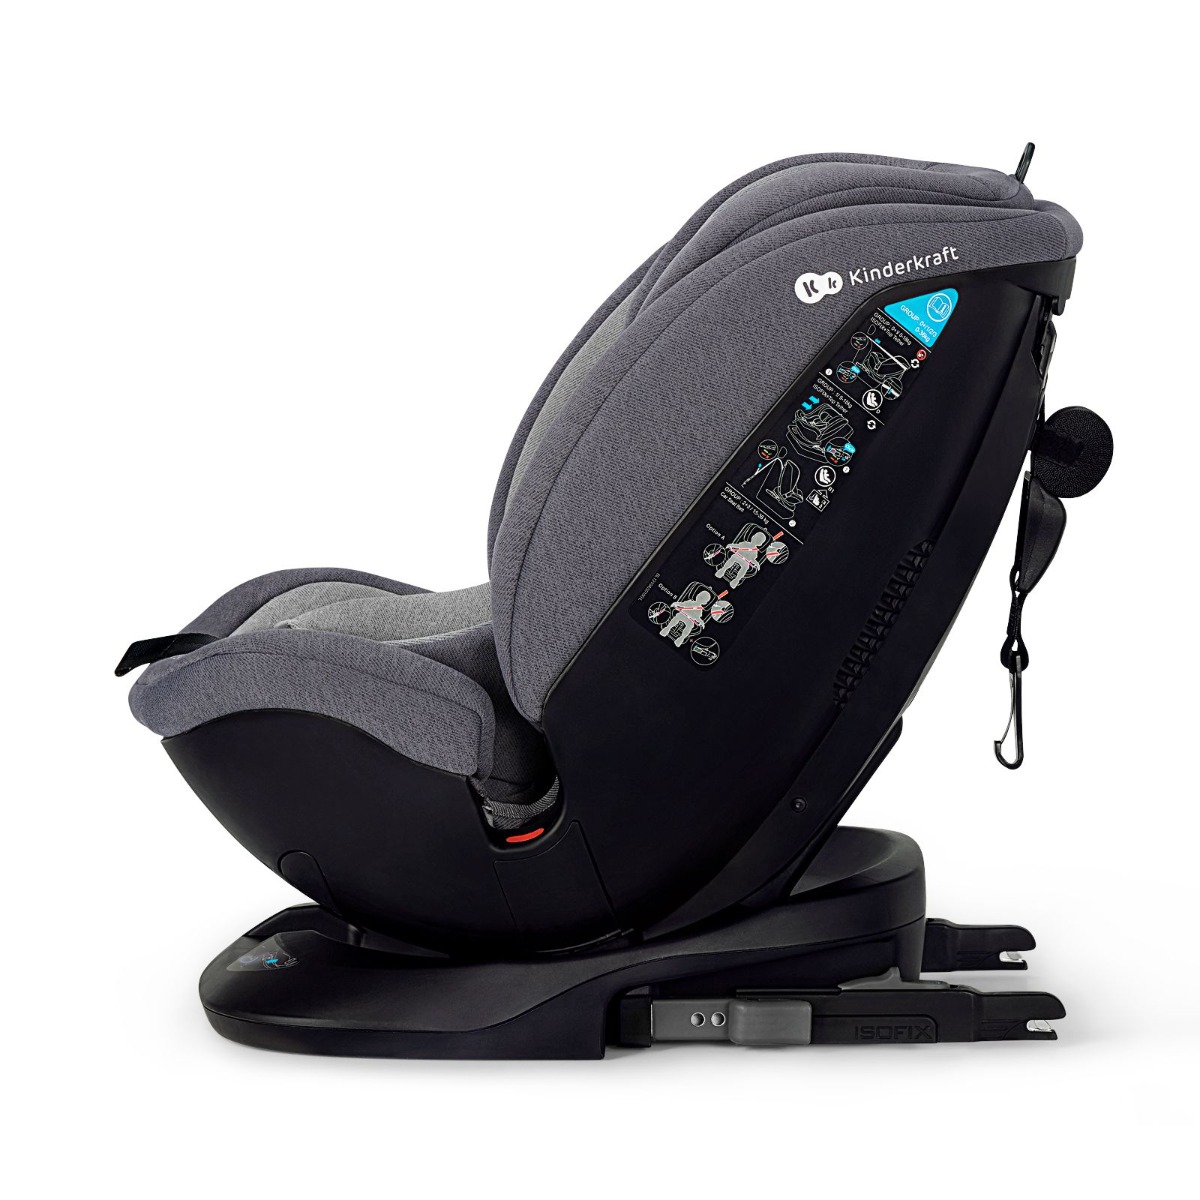 Car seat XPEDITION